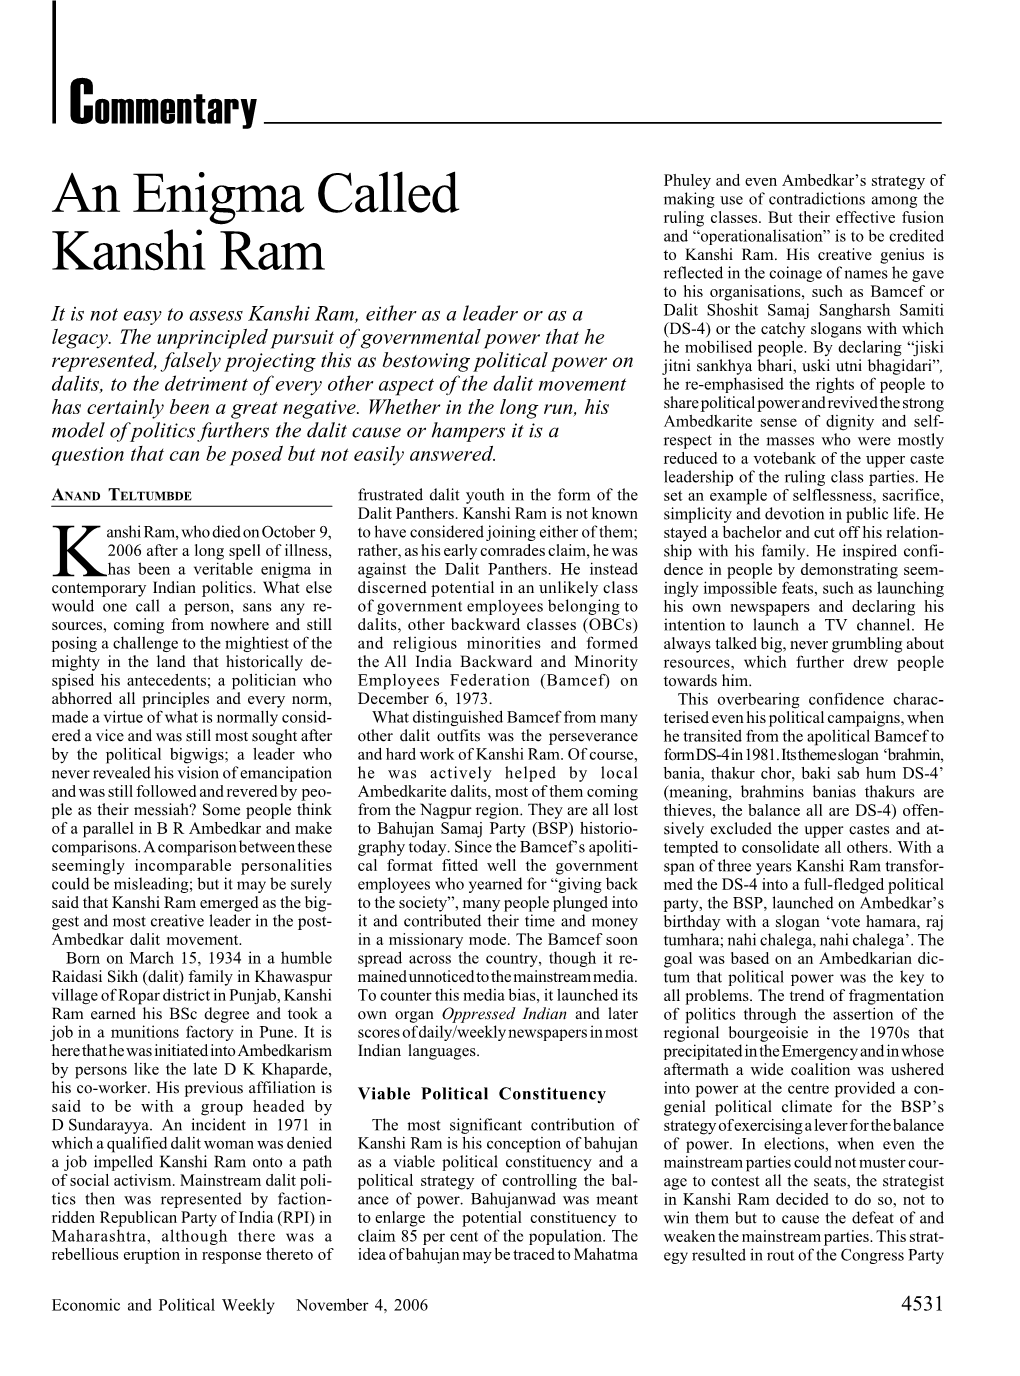 An Enigma Called Kanshi